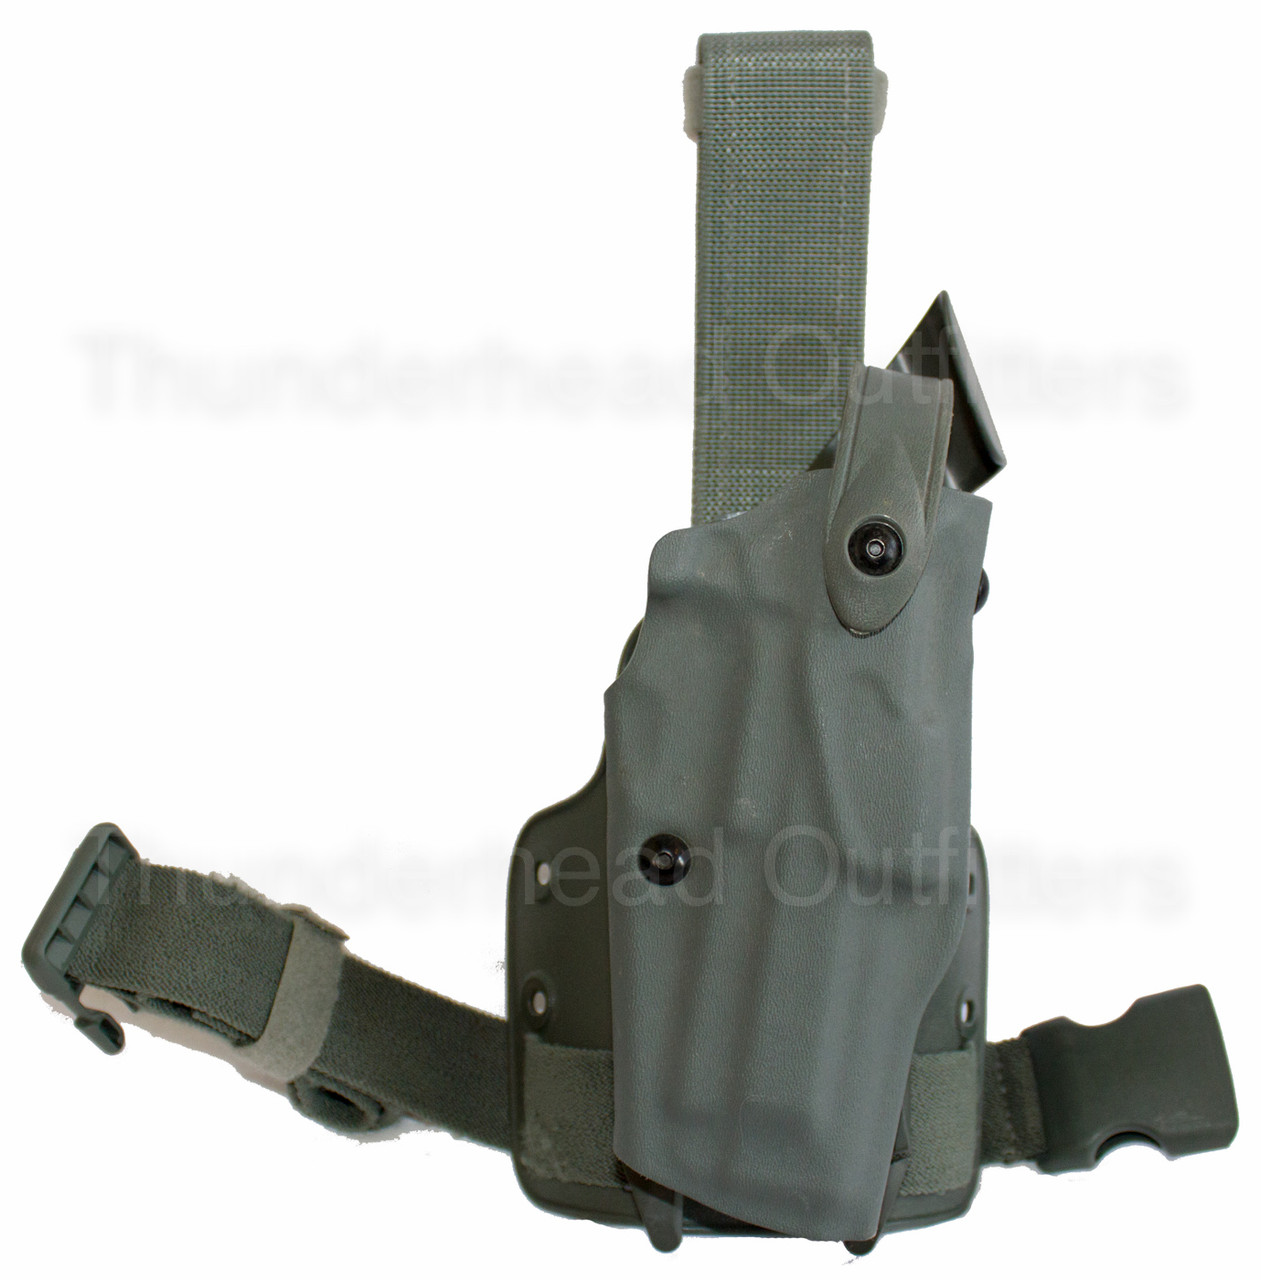 Woodland Green Tactical Leg Holster for Full Size 9mm 40 45 Pistols -  Barsony Holsters